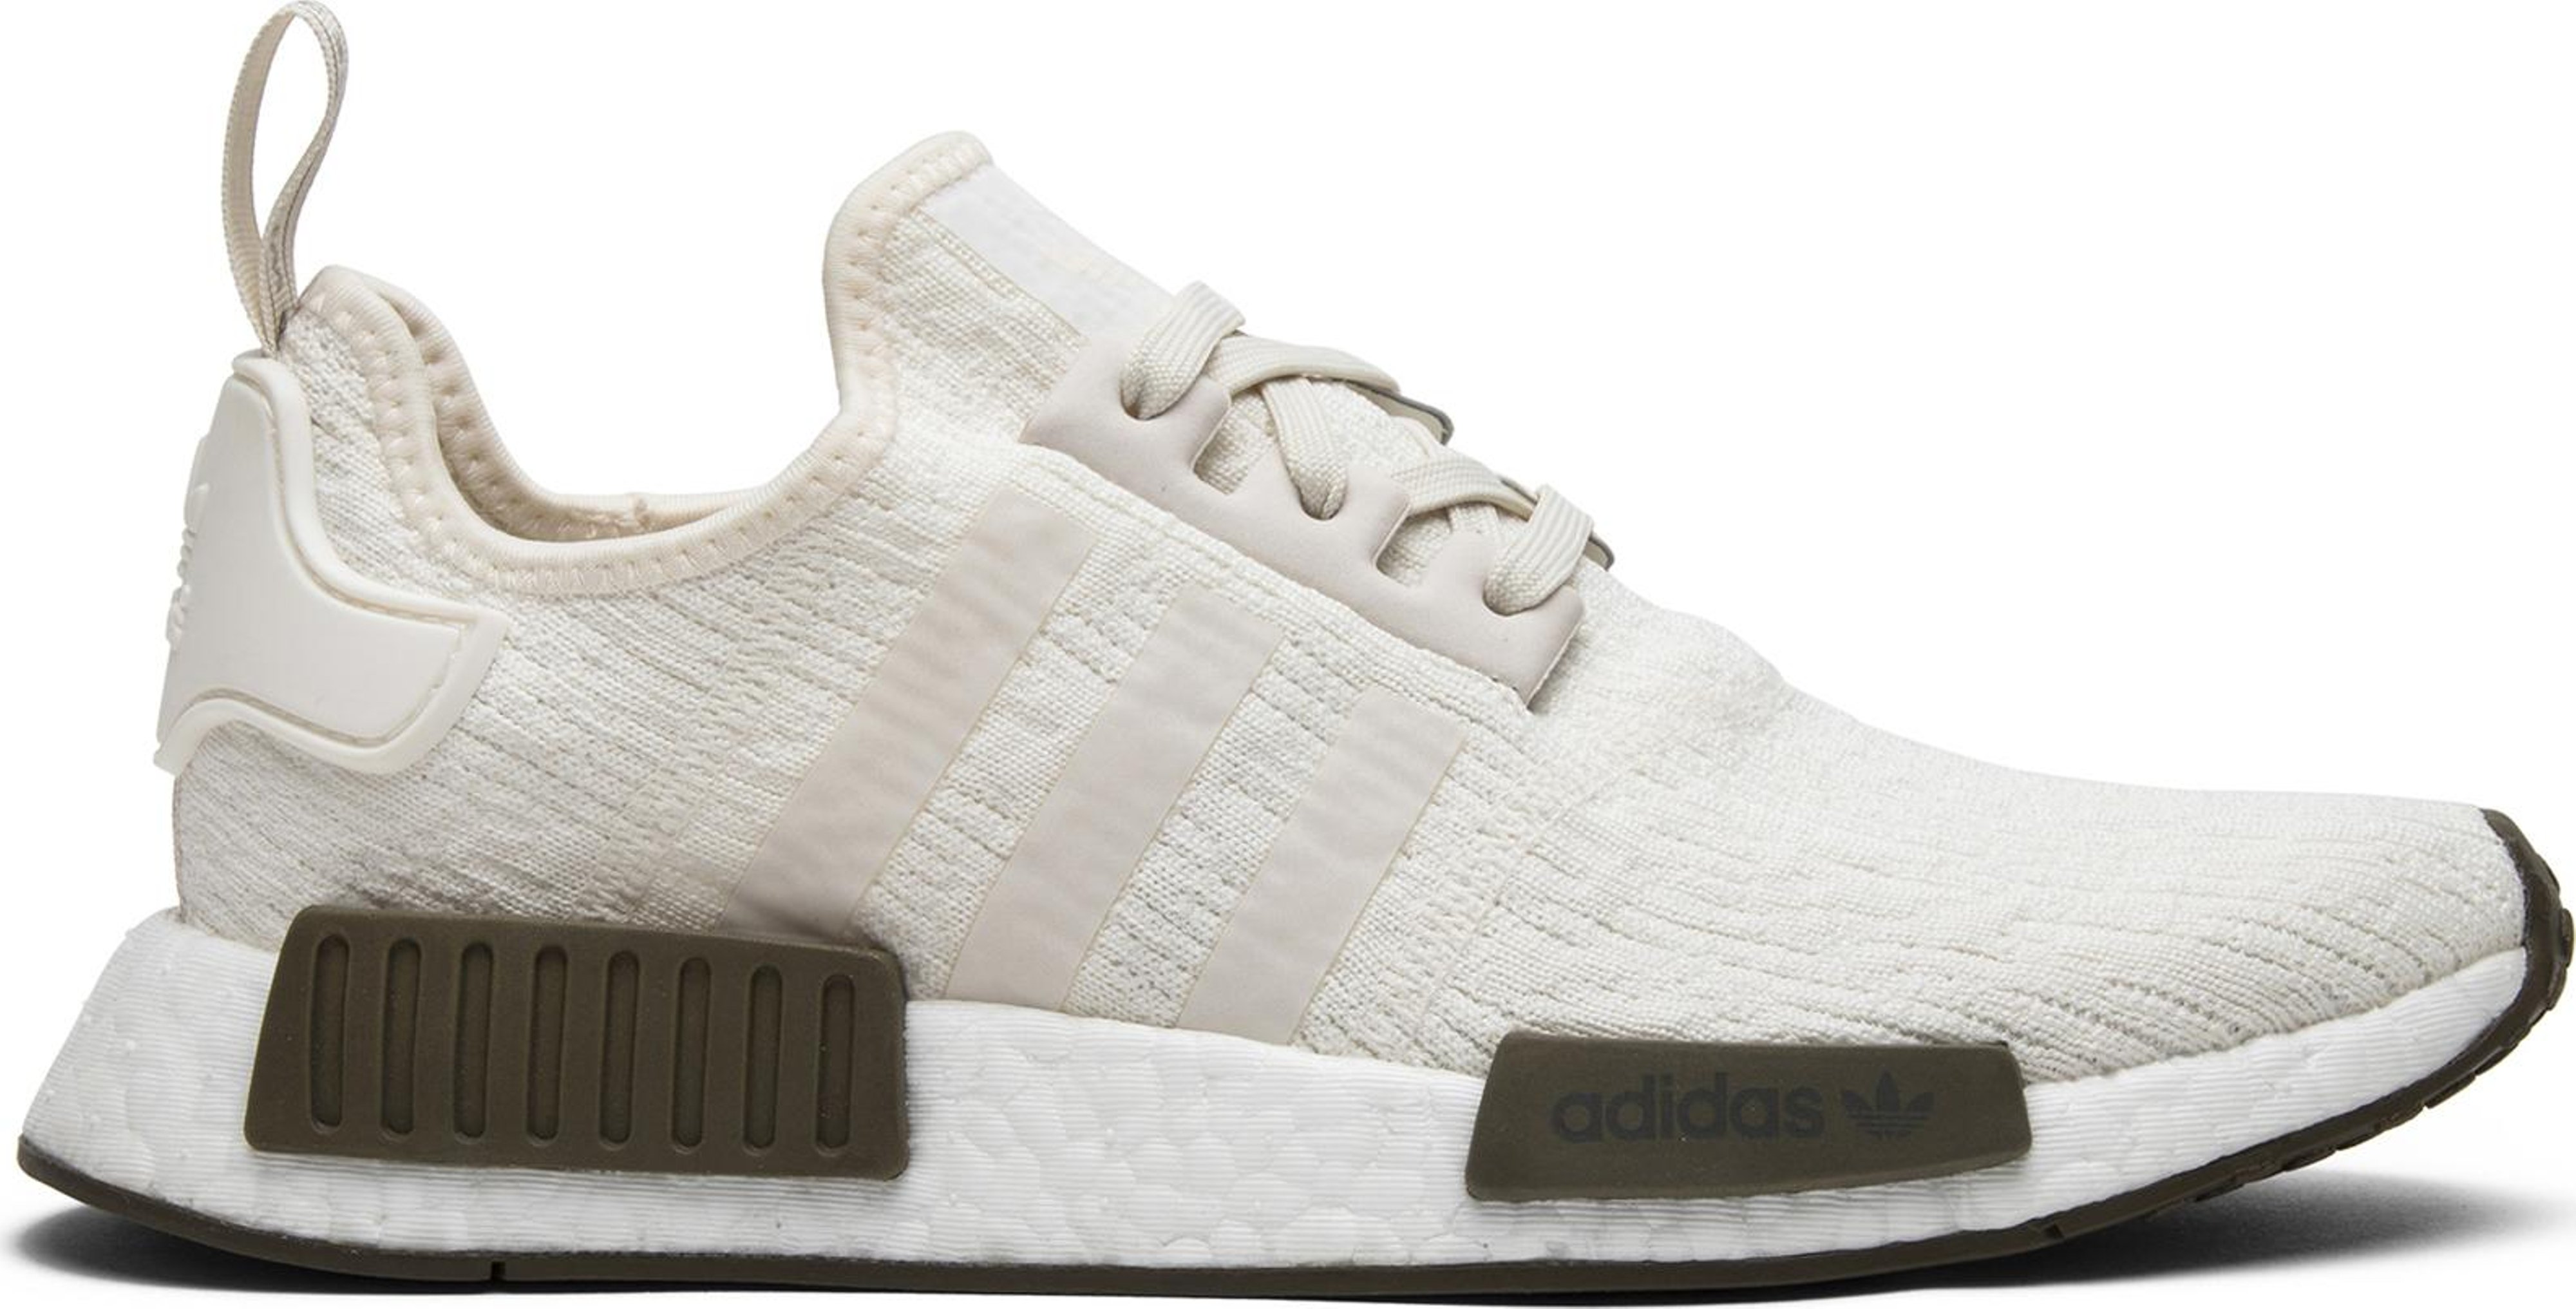 Buy Champs Sports x NMD_R1 'Chalk and Olive' - CQ0758 | GOAT